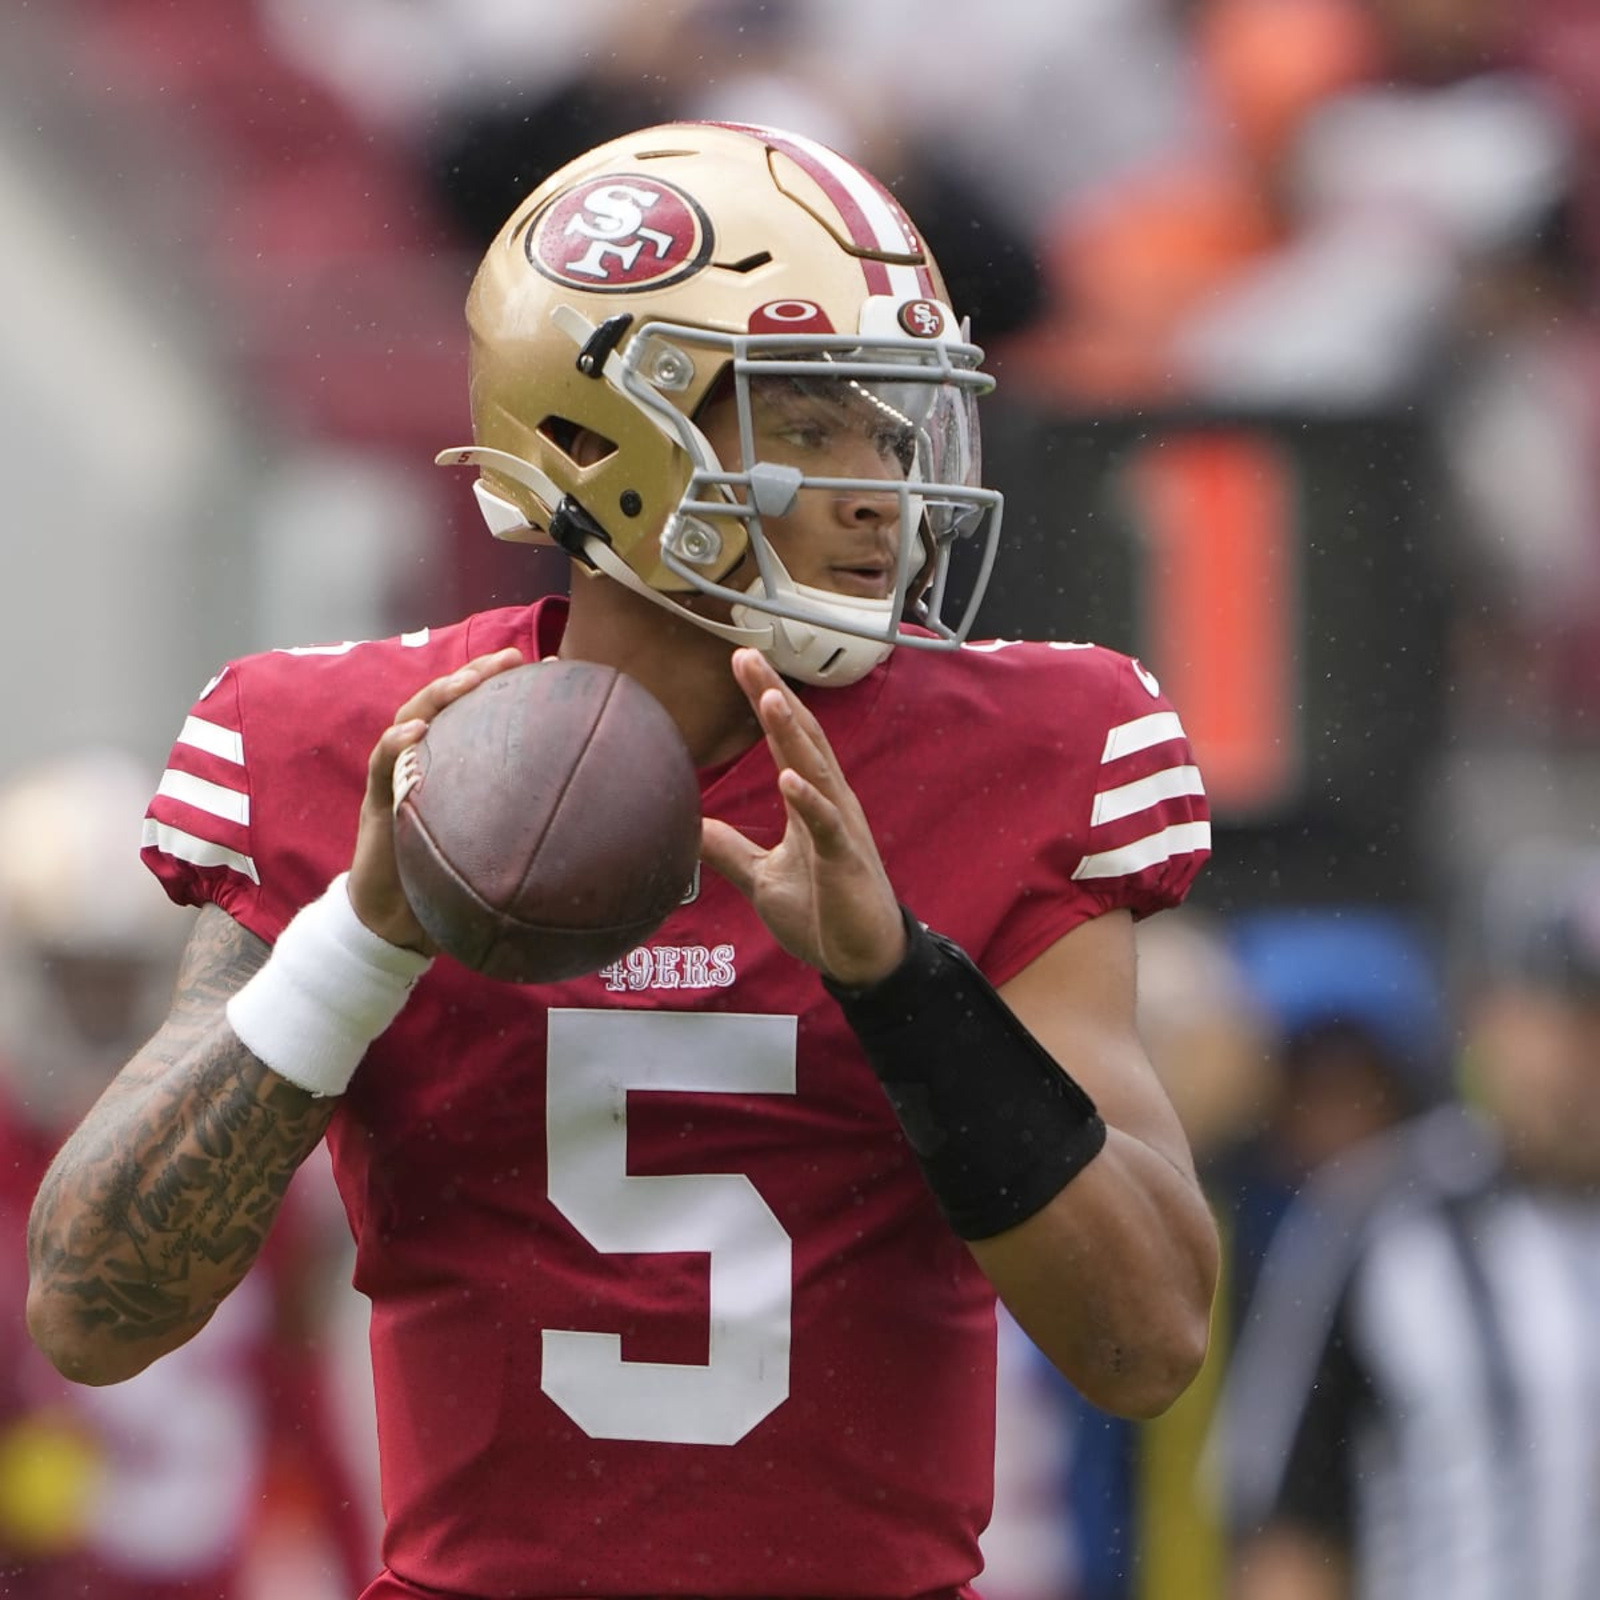 49ers trade QB Trey Lance to Cowboys for fourth-round draft pick